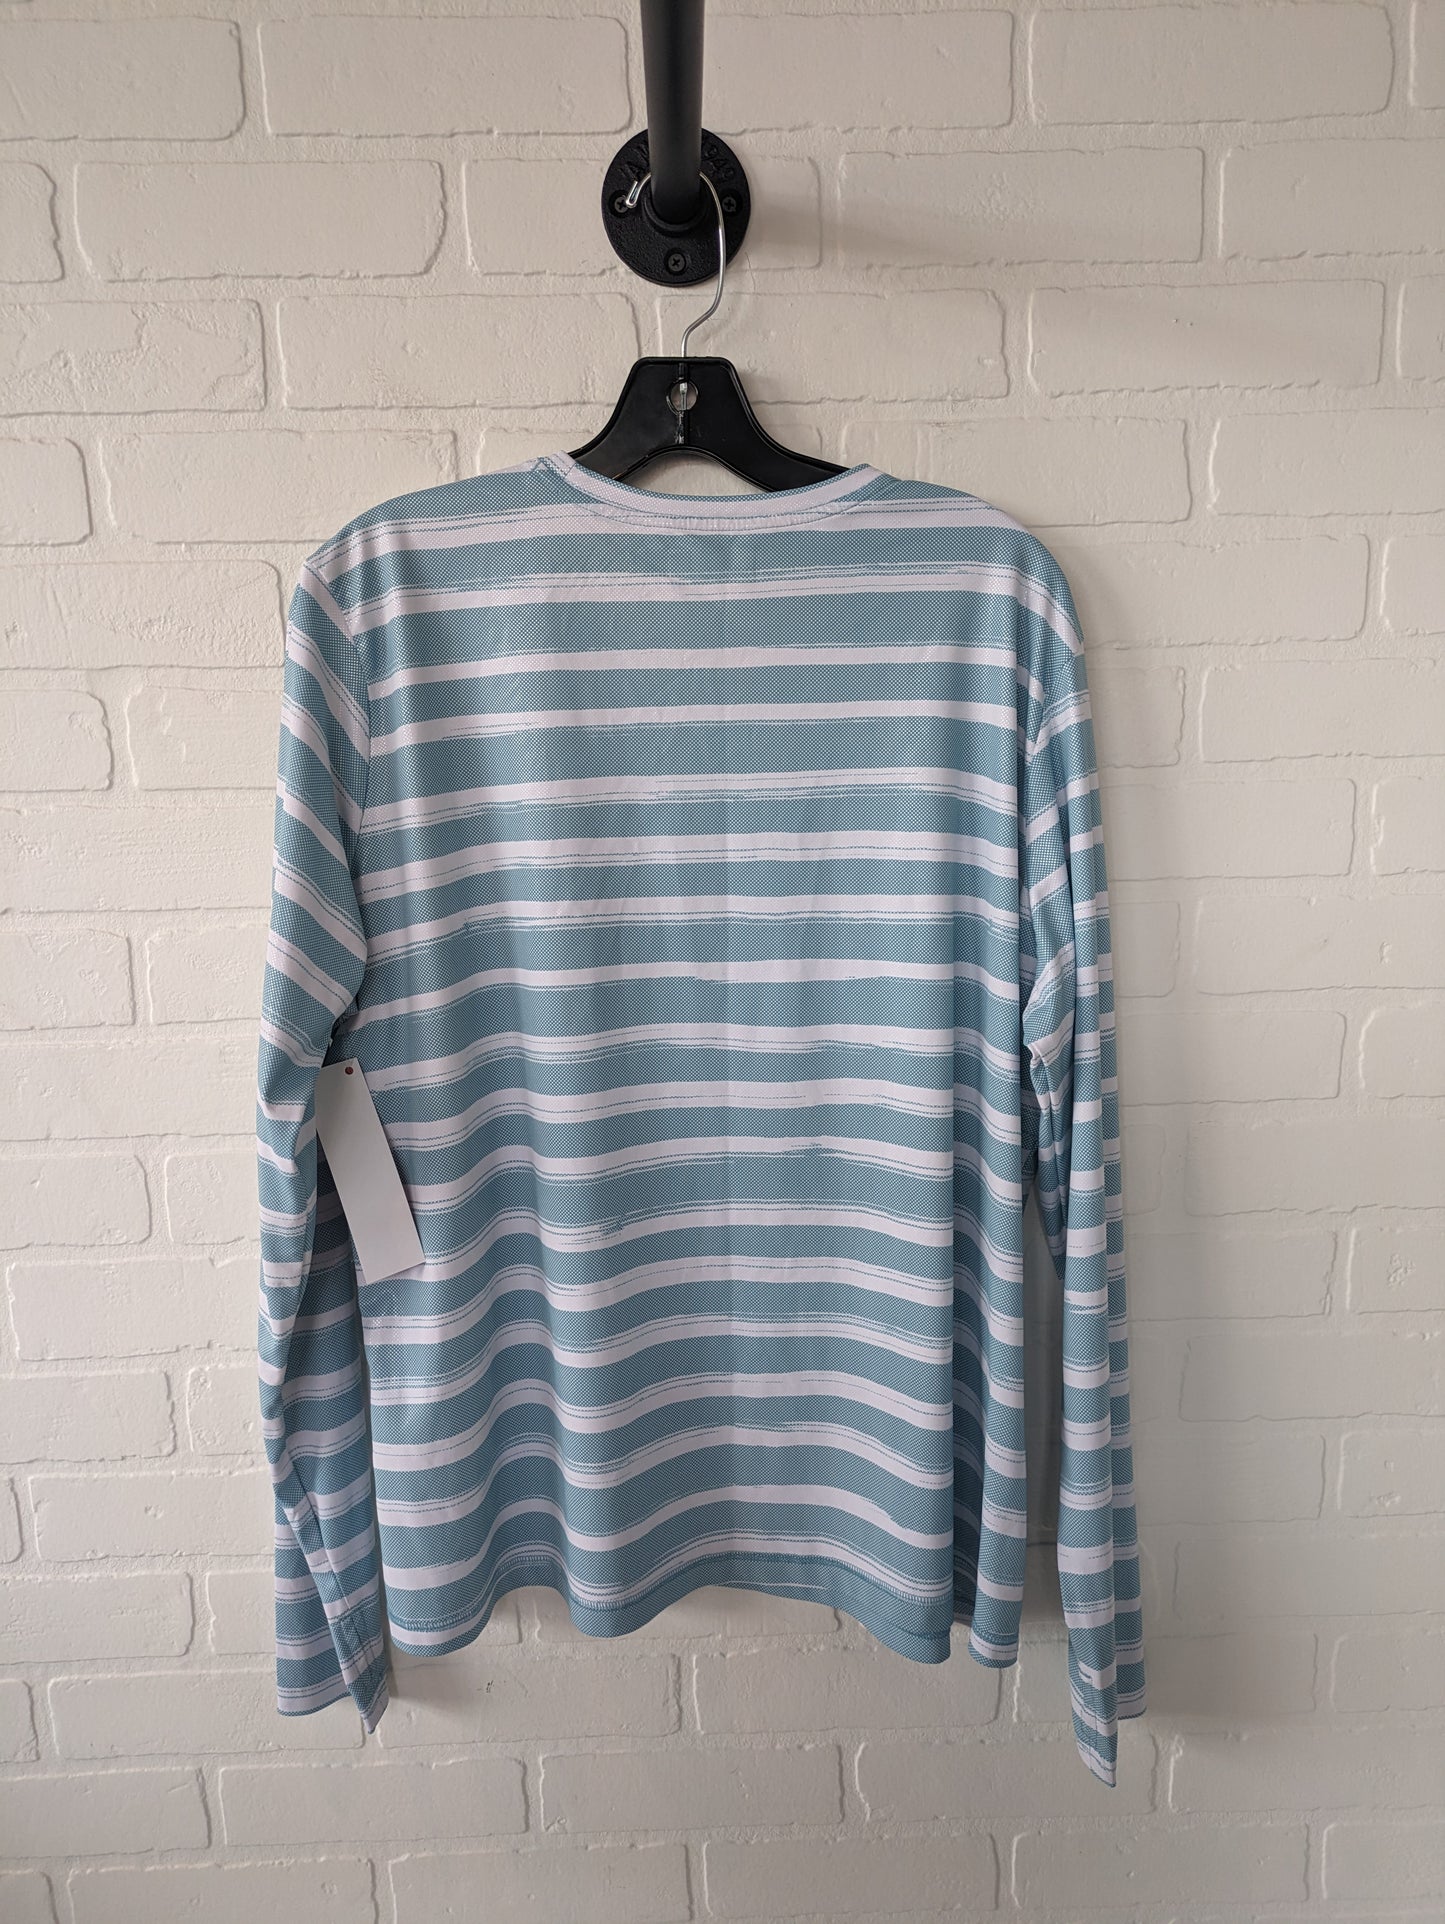 Athletic Top Long Sleeve Crewneck By Columbia  Size: 2x